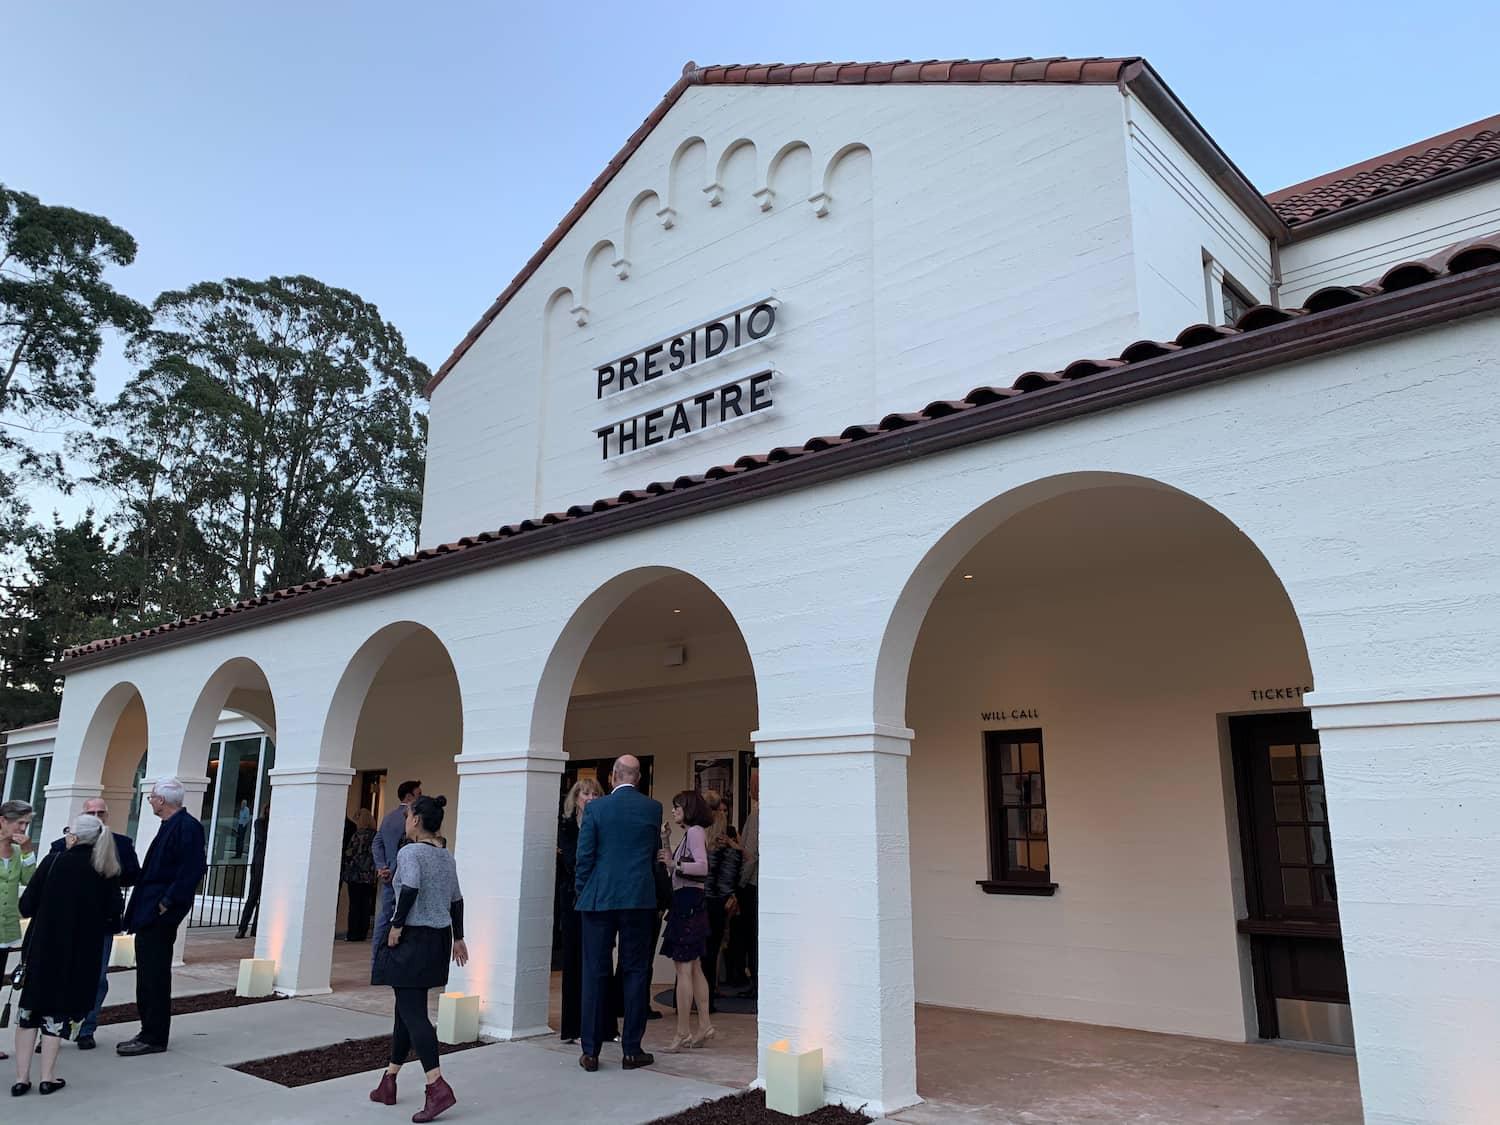 Presidio Theatre in the Presidio of San Francisco, with people standing in front.